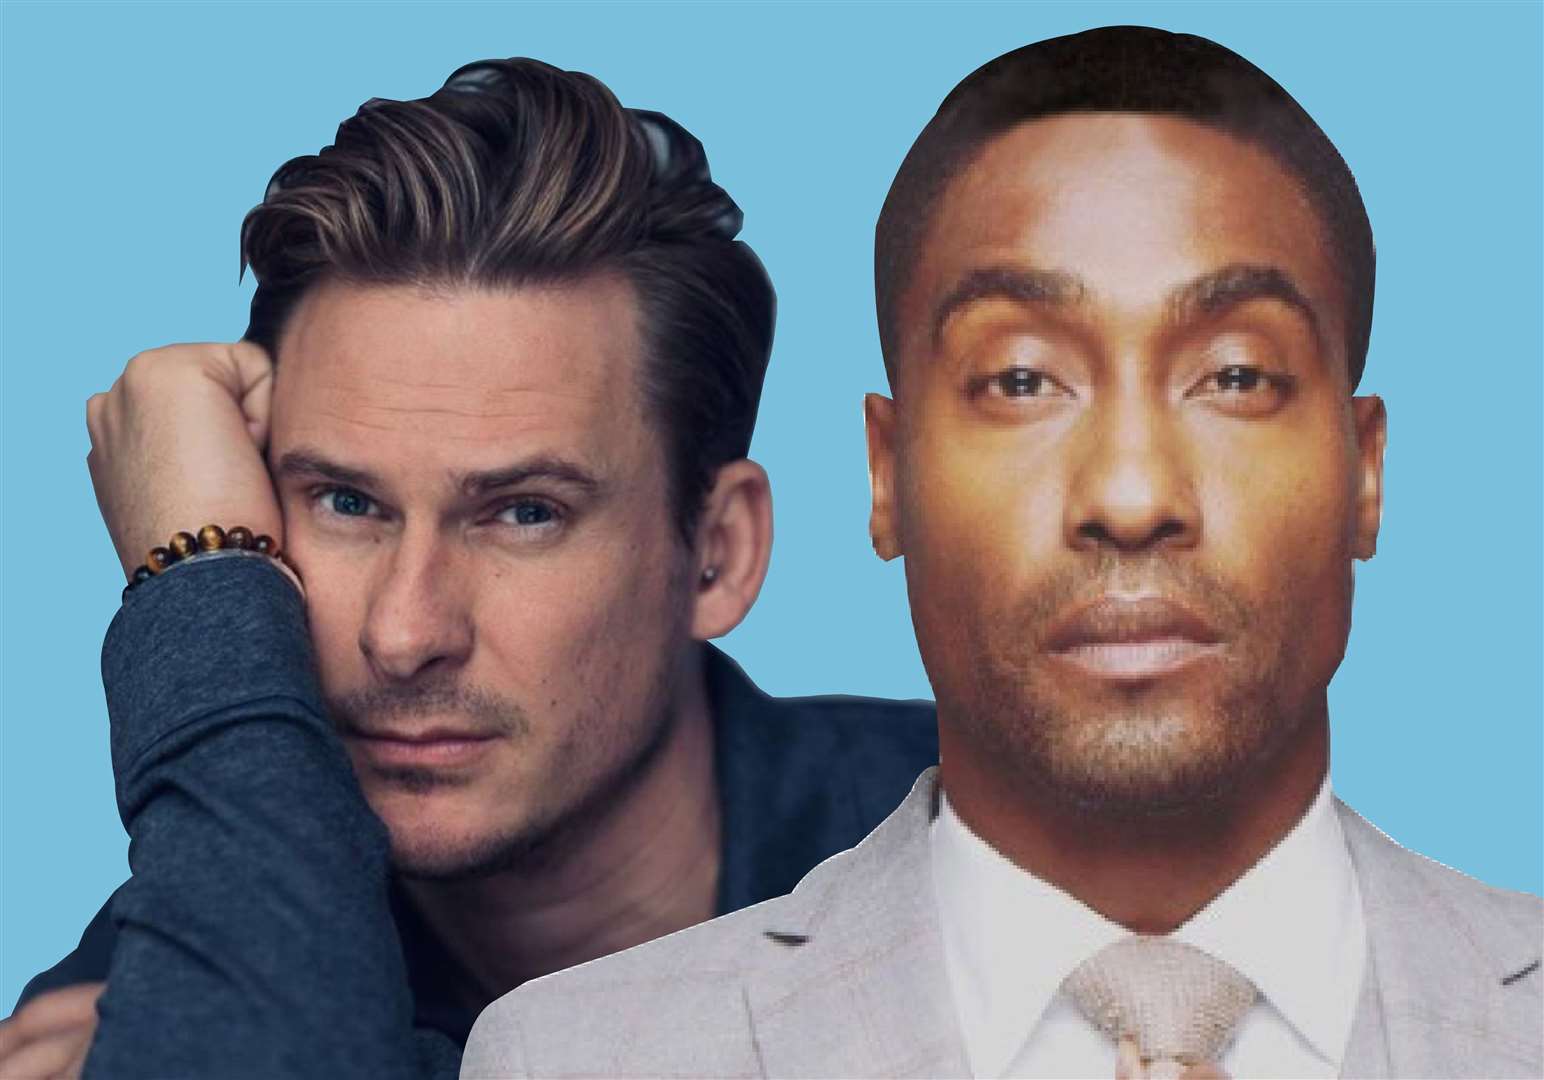 Blue boy band members Lee Ryan and Simon Webbe will be performing their hits. Picture: Foodies Festival